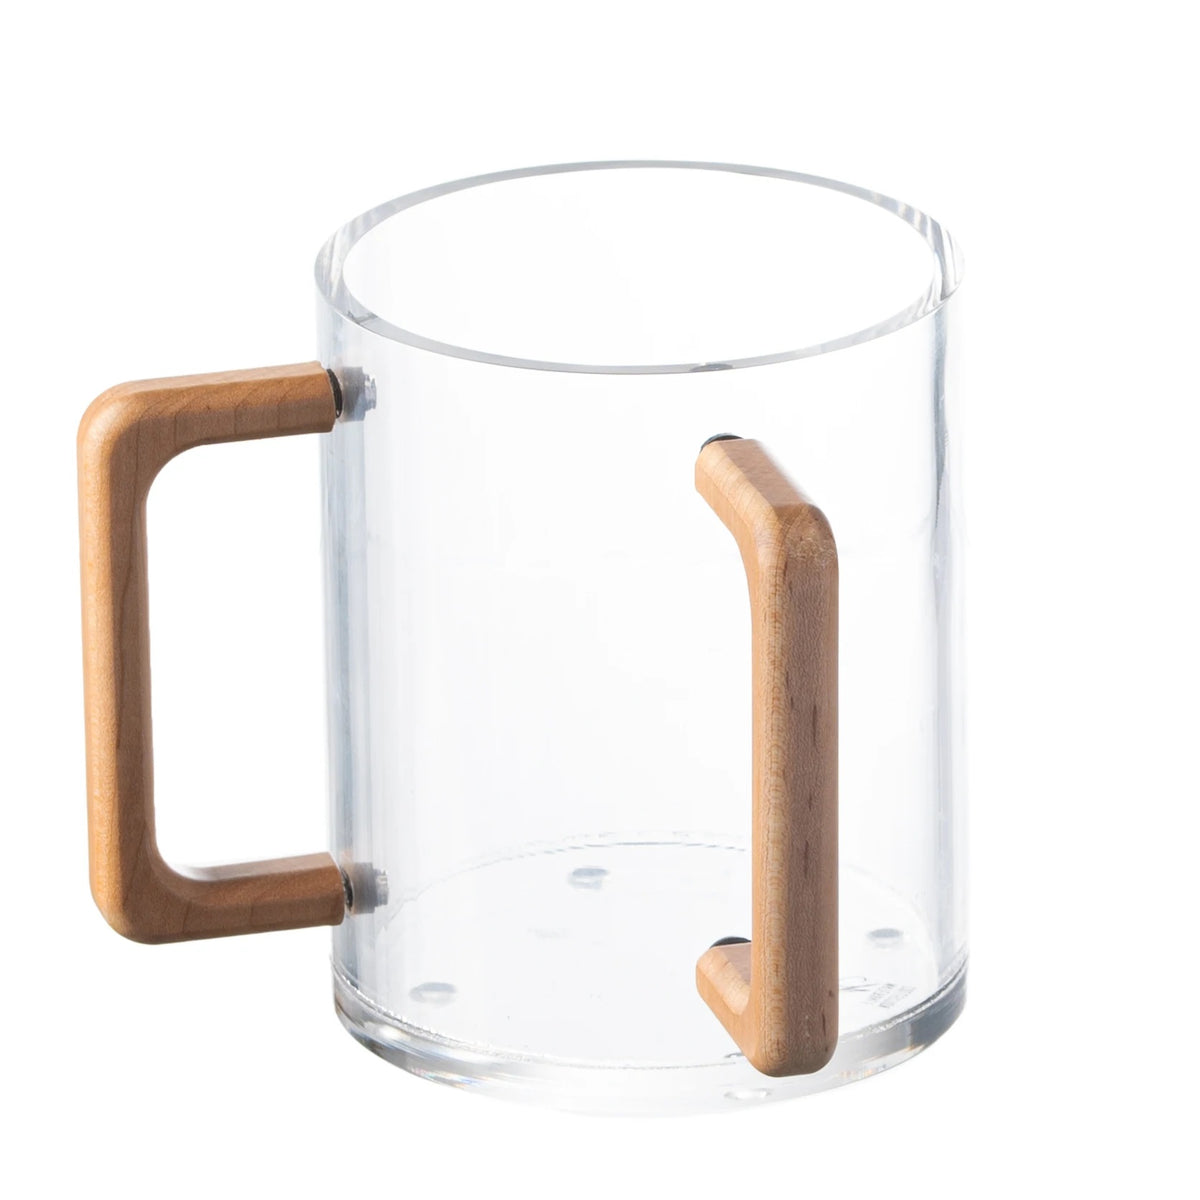 Waterdale Wood Look Handles, Lucite Washing Cup - Assorted Colors